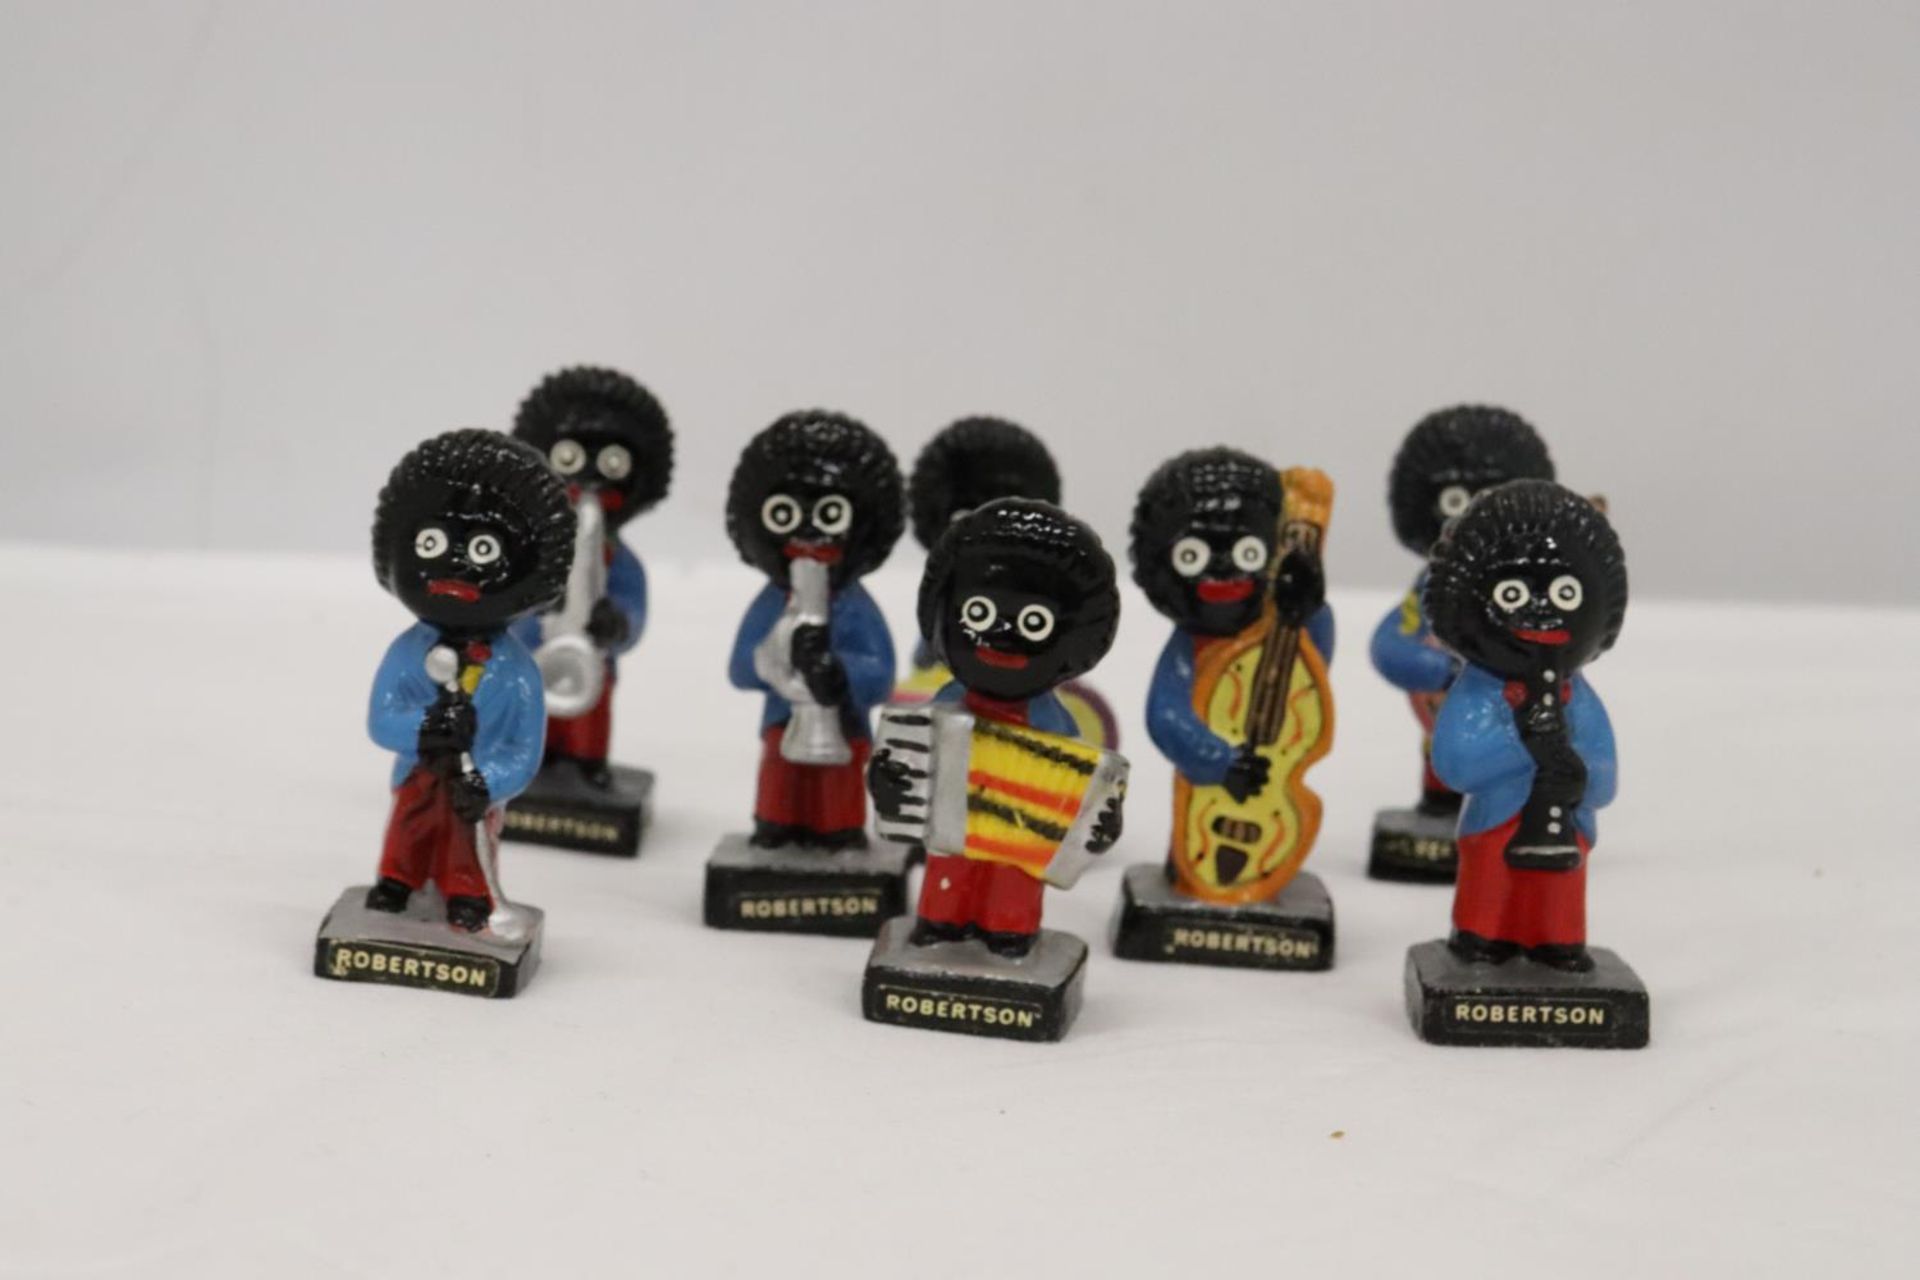 A COLLECTION OF VINTAGE ROBERTSONS FIGURES BAND MEMBERS - 9 IN TOTAL, 1 A/F - Image 2 of 6